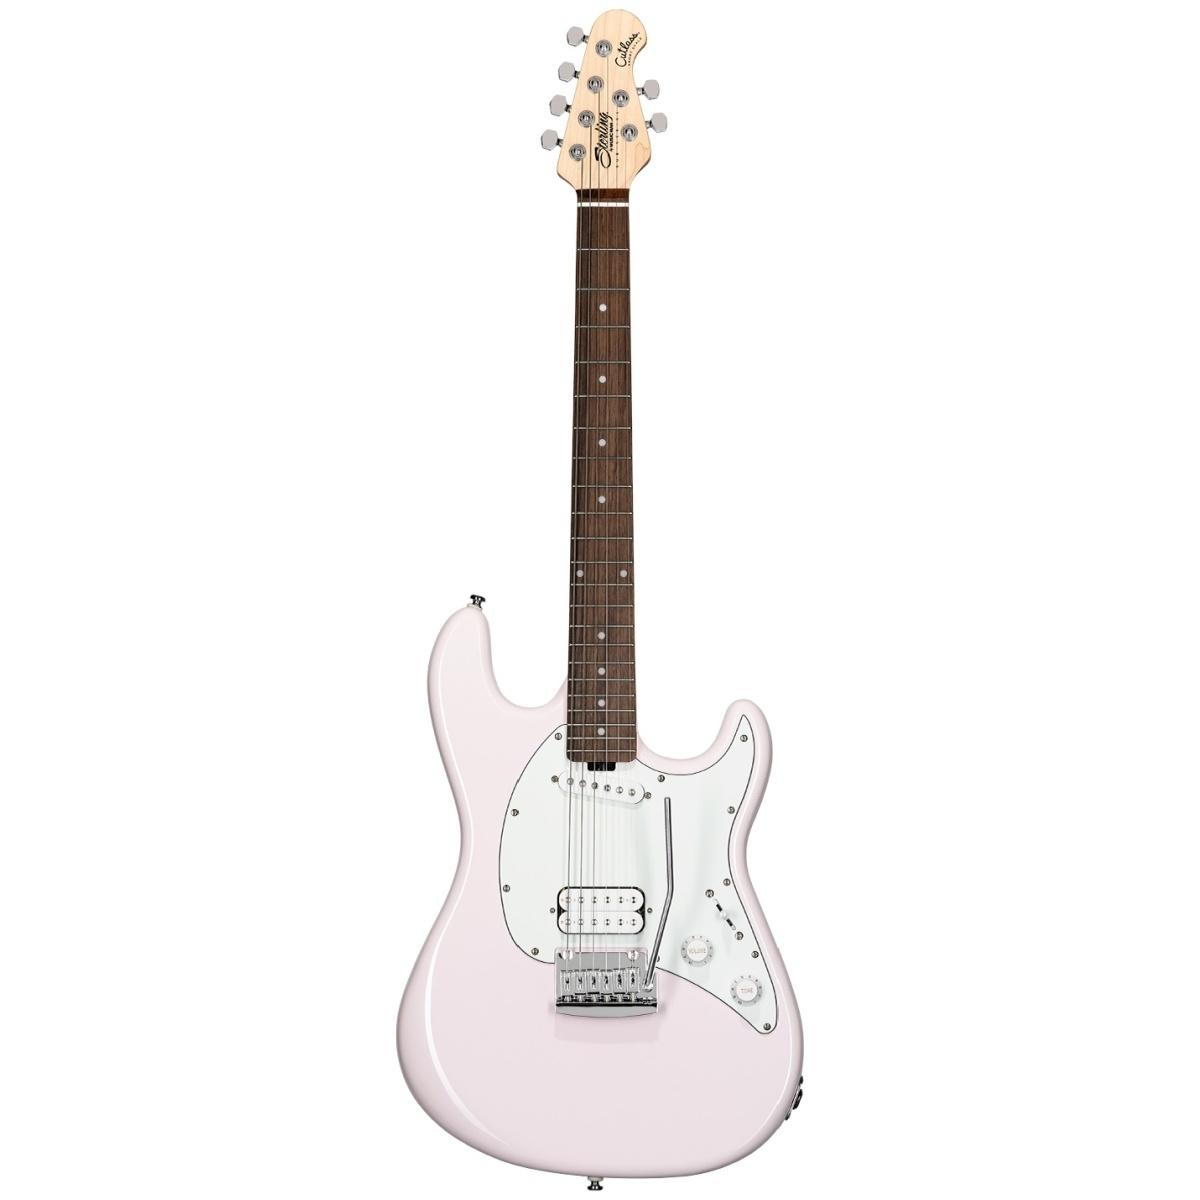 STERLING BY MUSIC MAN Cutlass Short Scale HS Shell Pink Tastiera Lauro